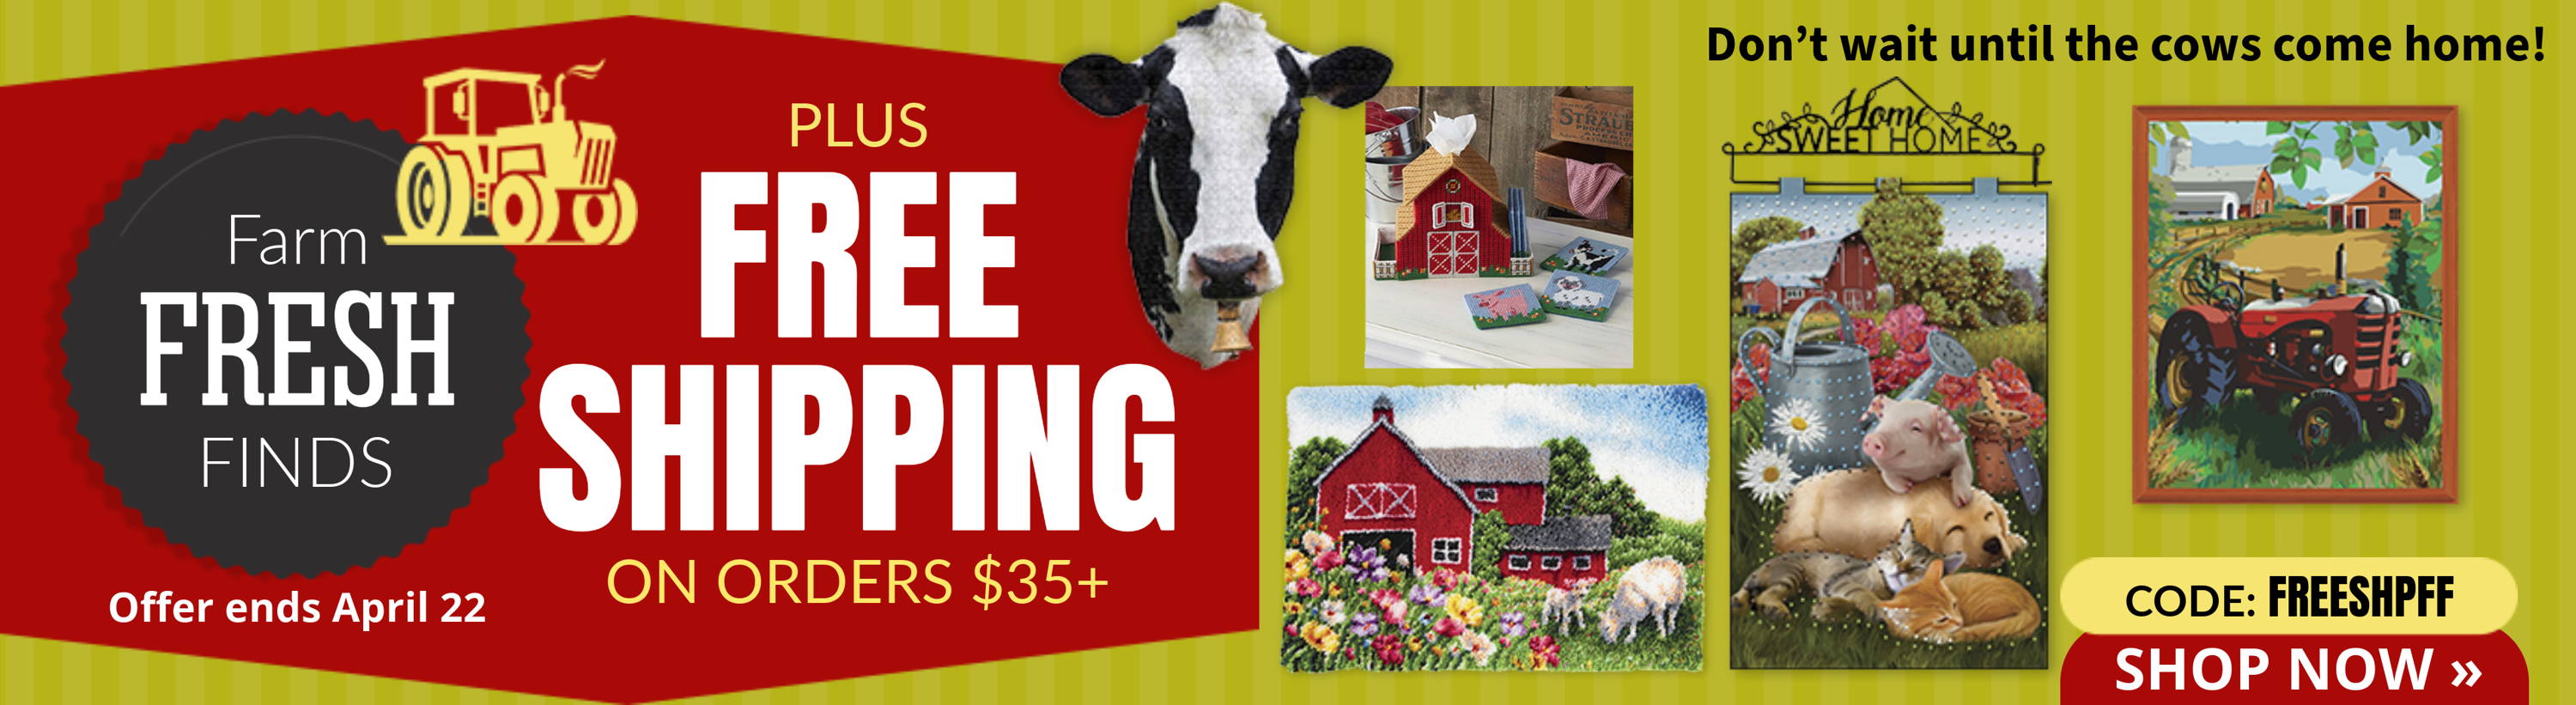 Free Shipping on orders over $35 with code: FREESHPFF (until April 22). Images: Featured farm kits & projects.